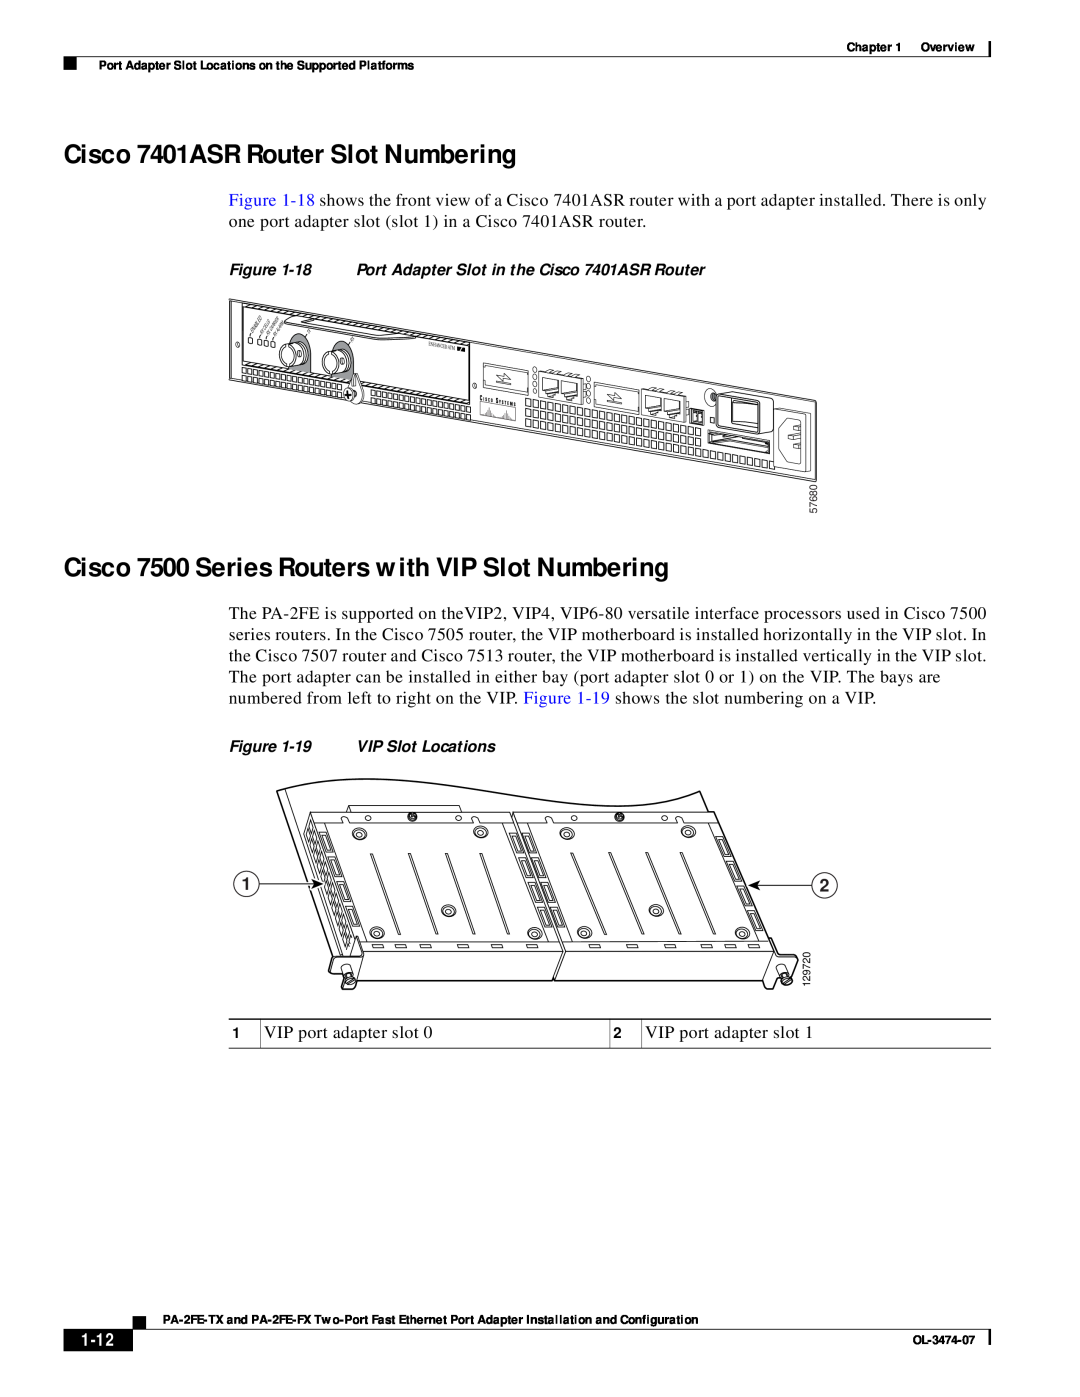 Cisco Systems PA-2FE-TX manual Cisco 7401ASR Router Slot Numbering, Cisco 7500 Series Routers with VIP Slot Numbering, 1-12 